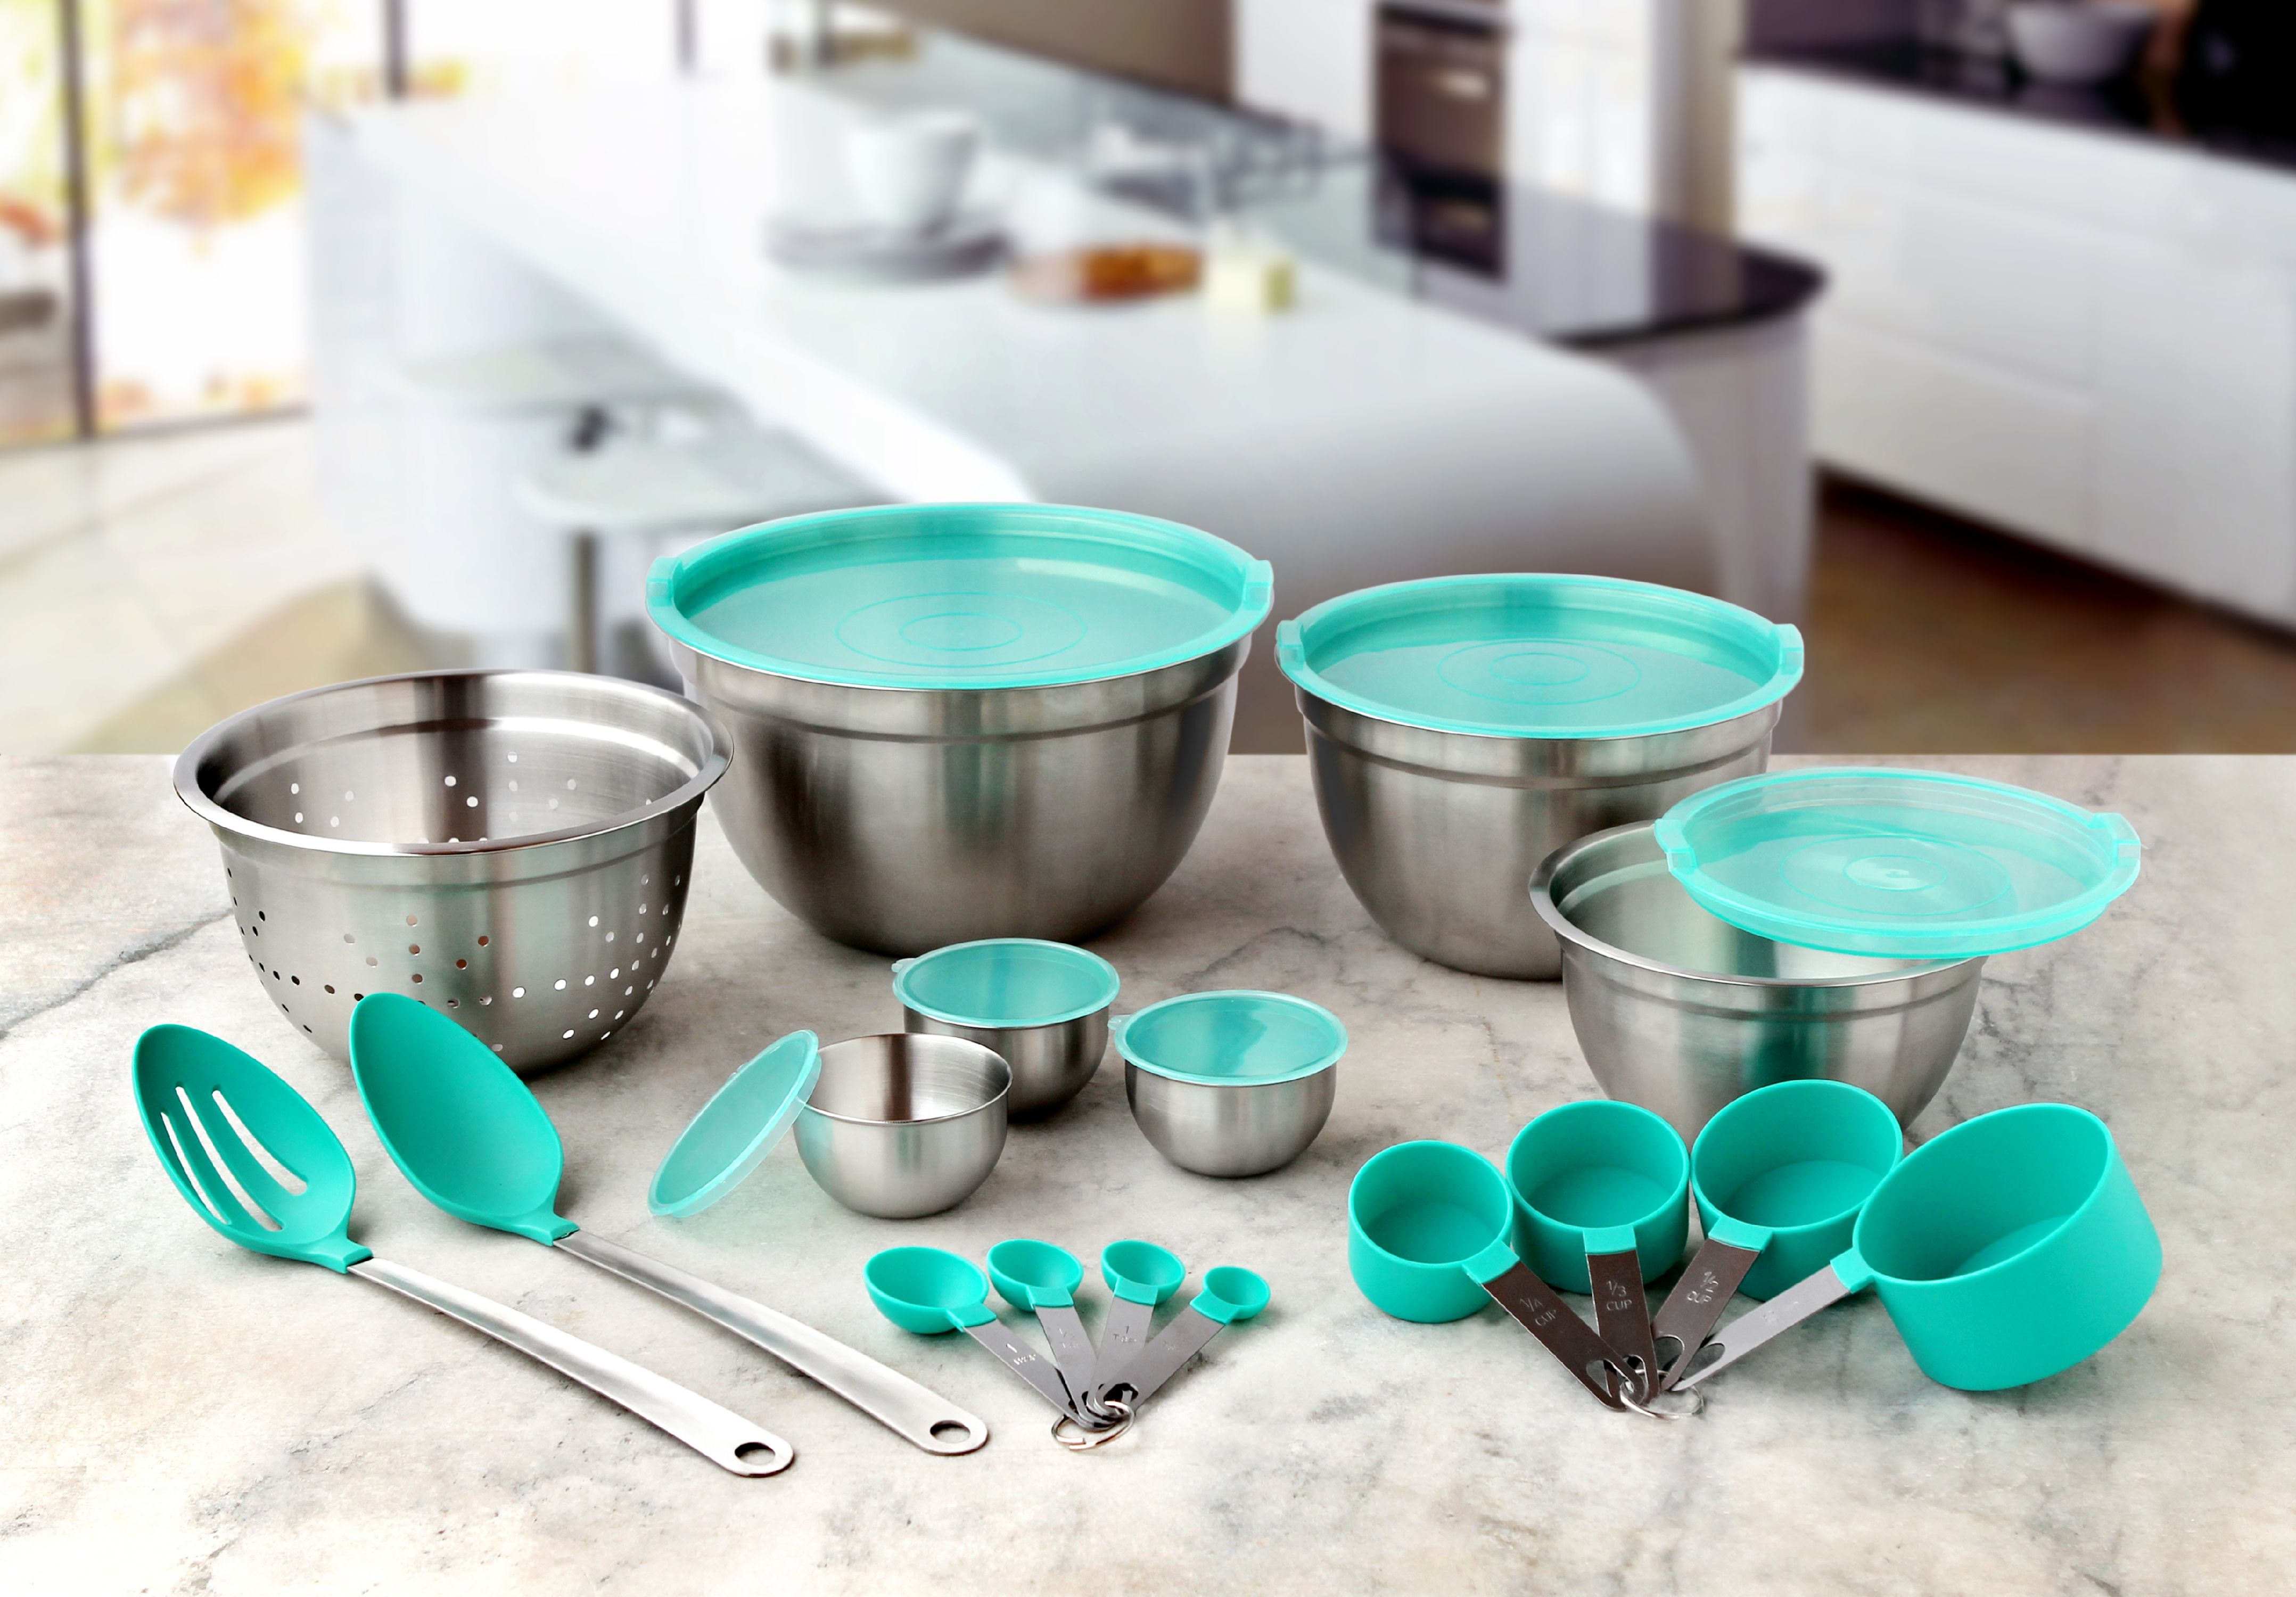 Better Homes & Gardens Teal Gadget and Utensil Set, 23 Piece - image 1 of 7